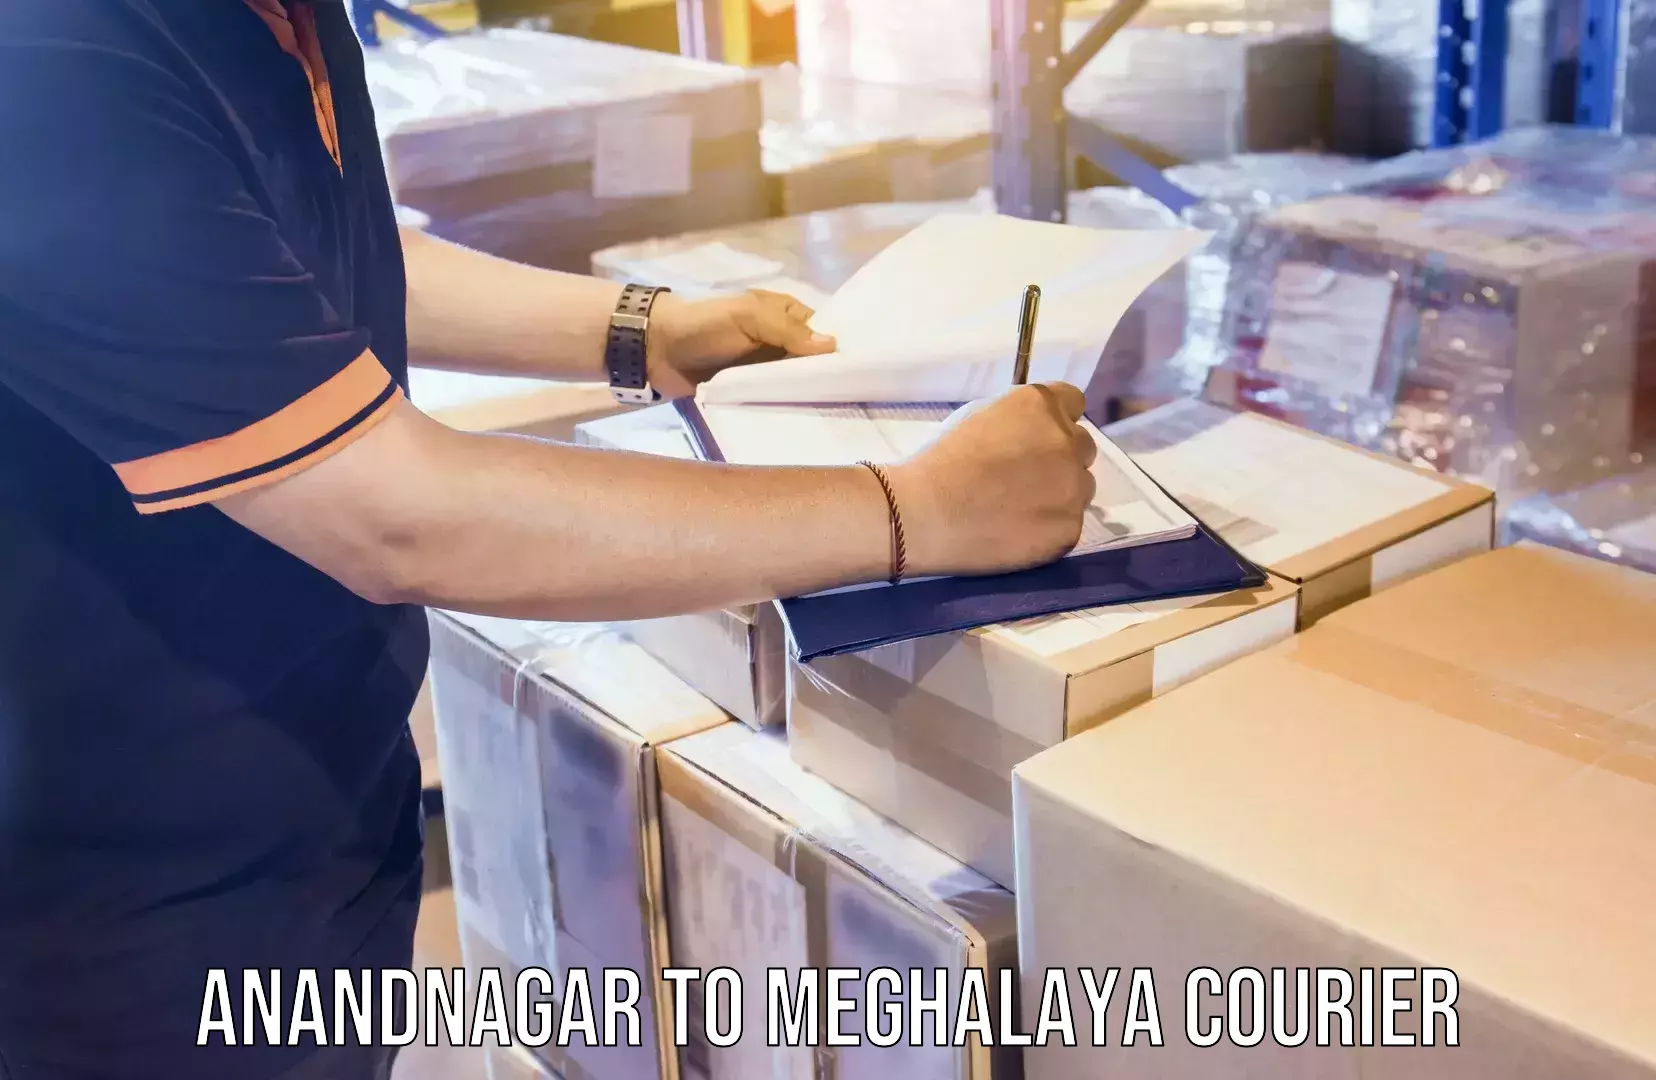 Flexible delivery schedules Anandnagar to Meghalaya